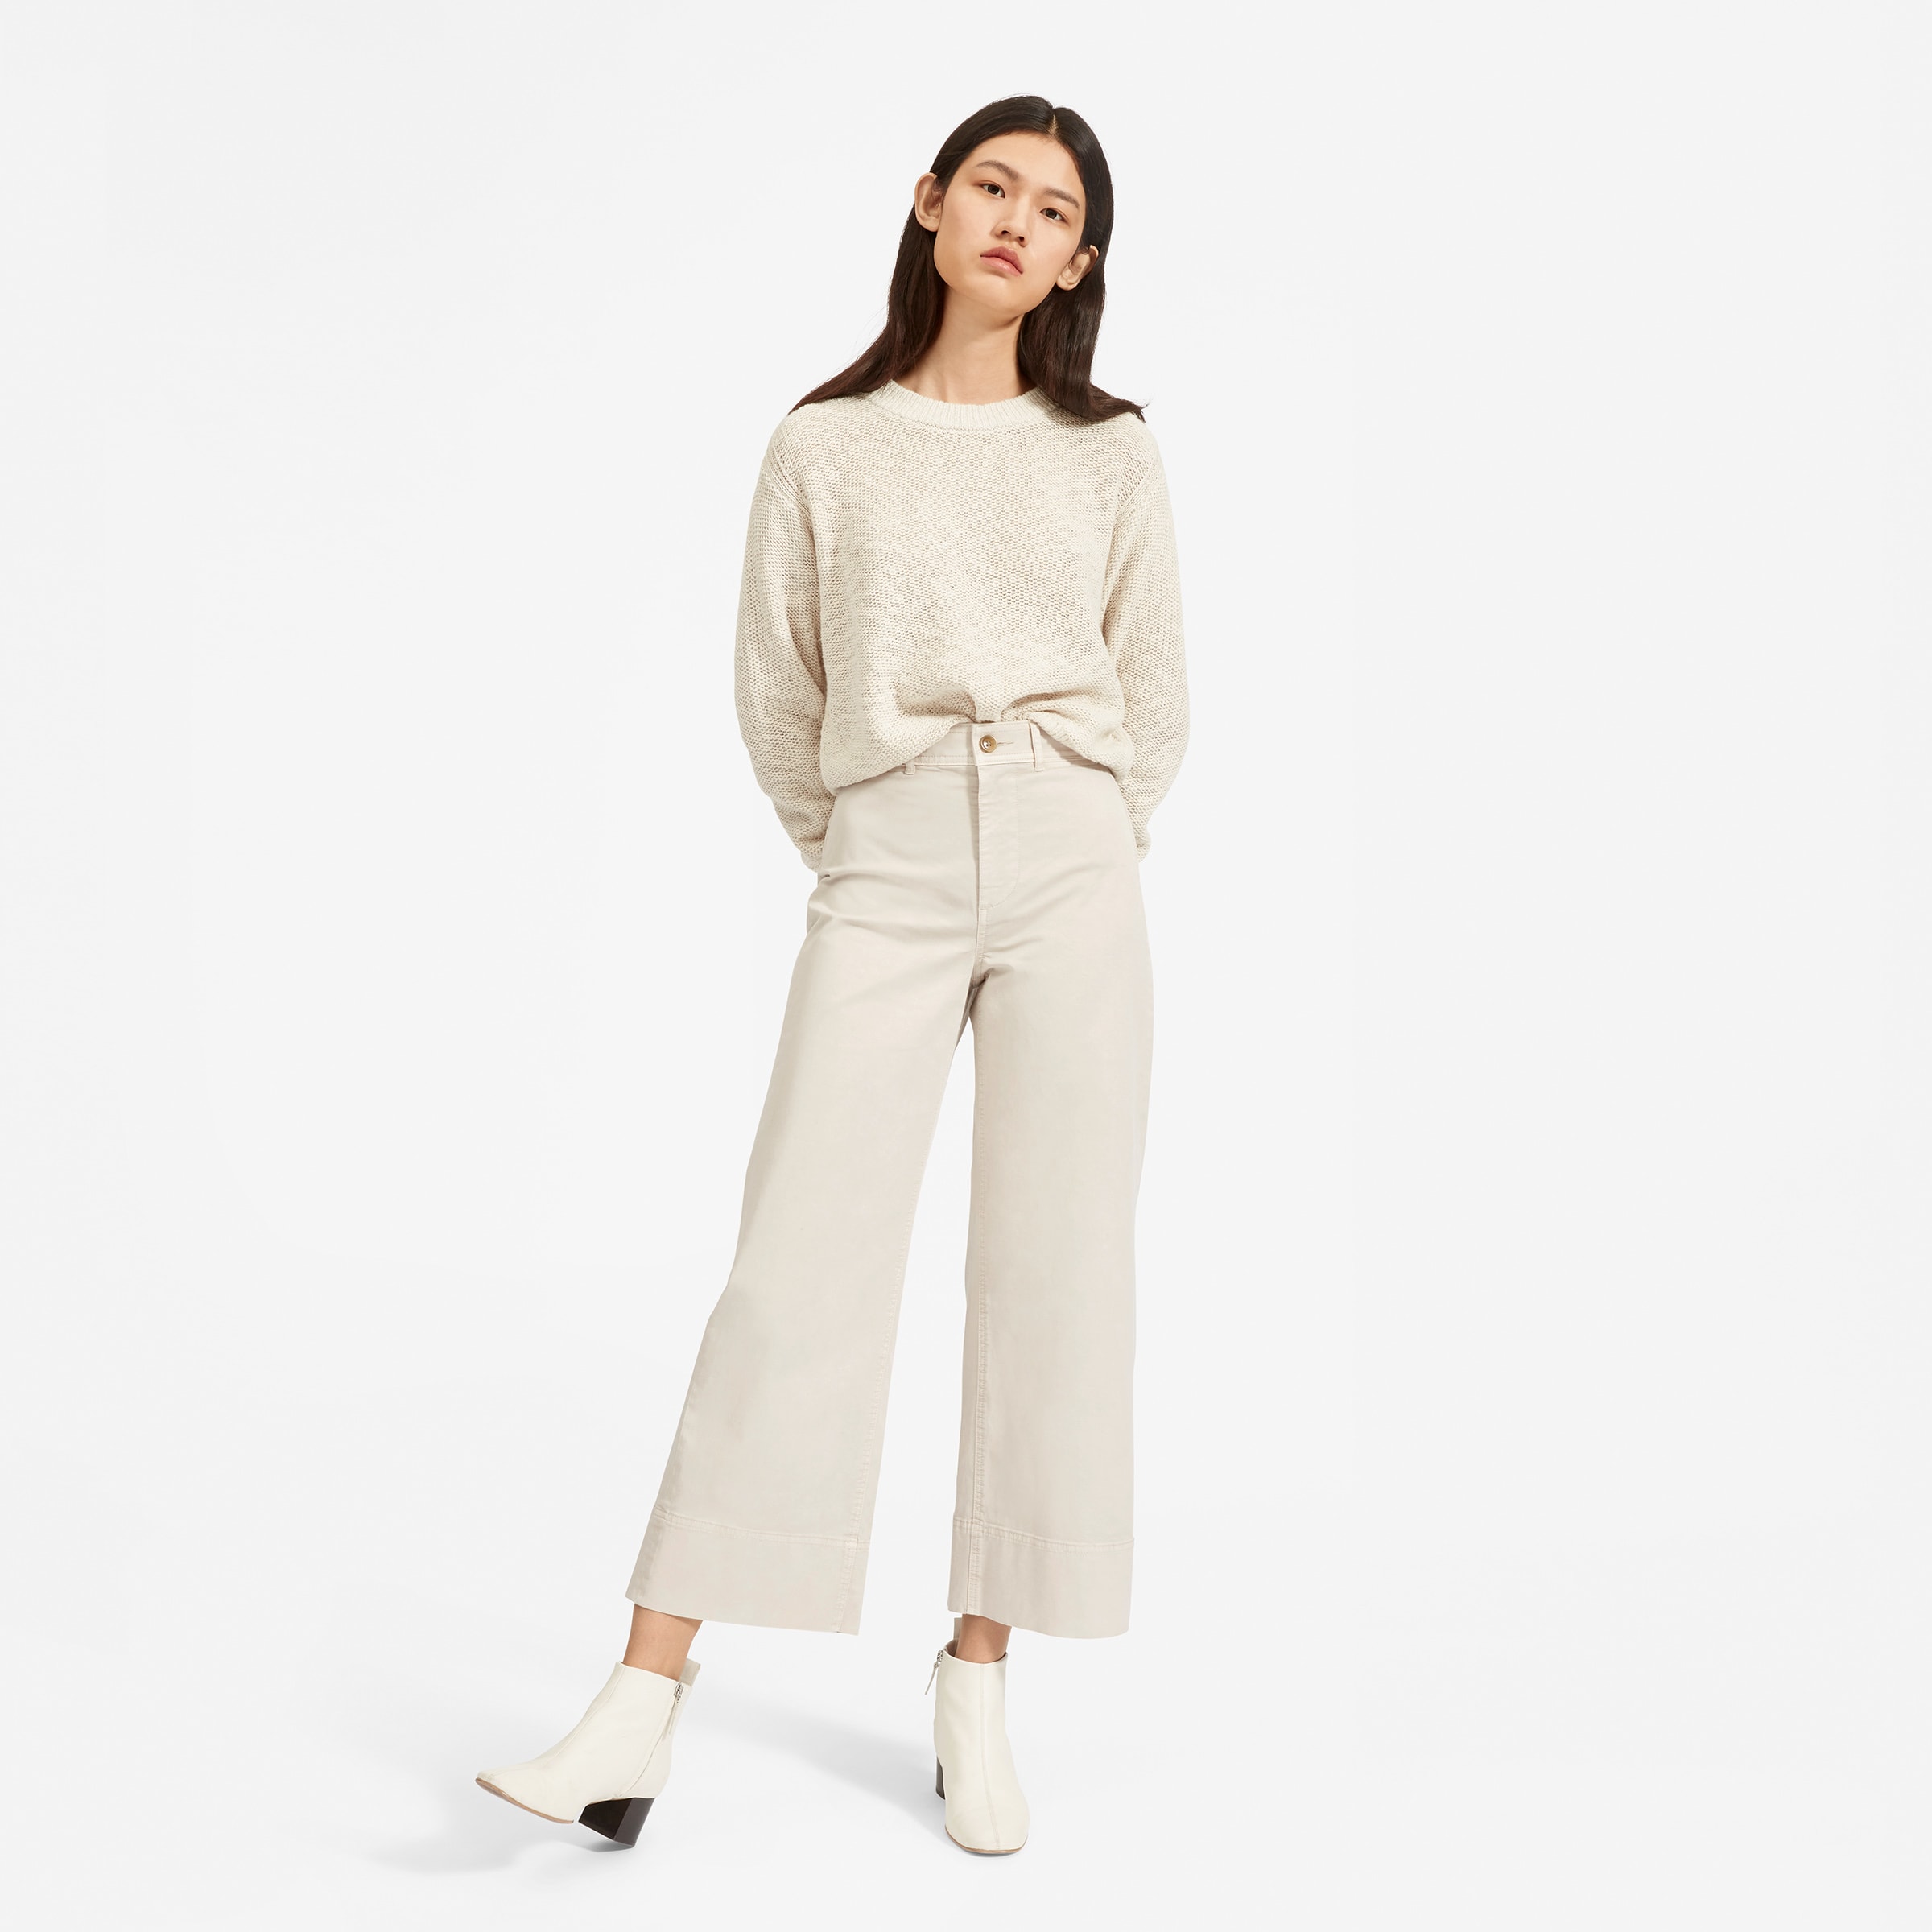 The Wide Leg Sailor Pant in Chino